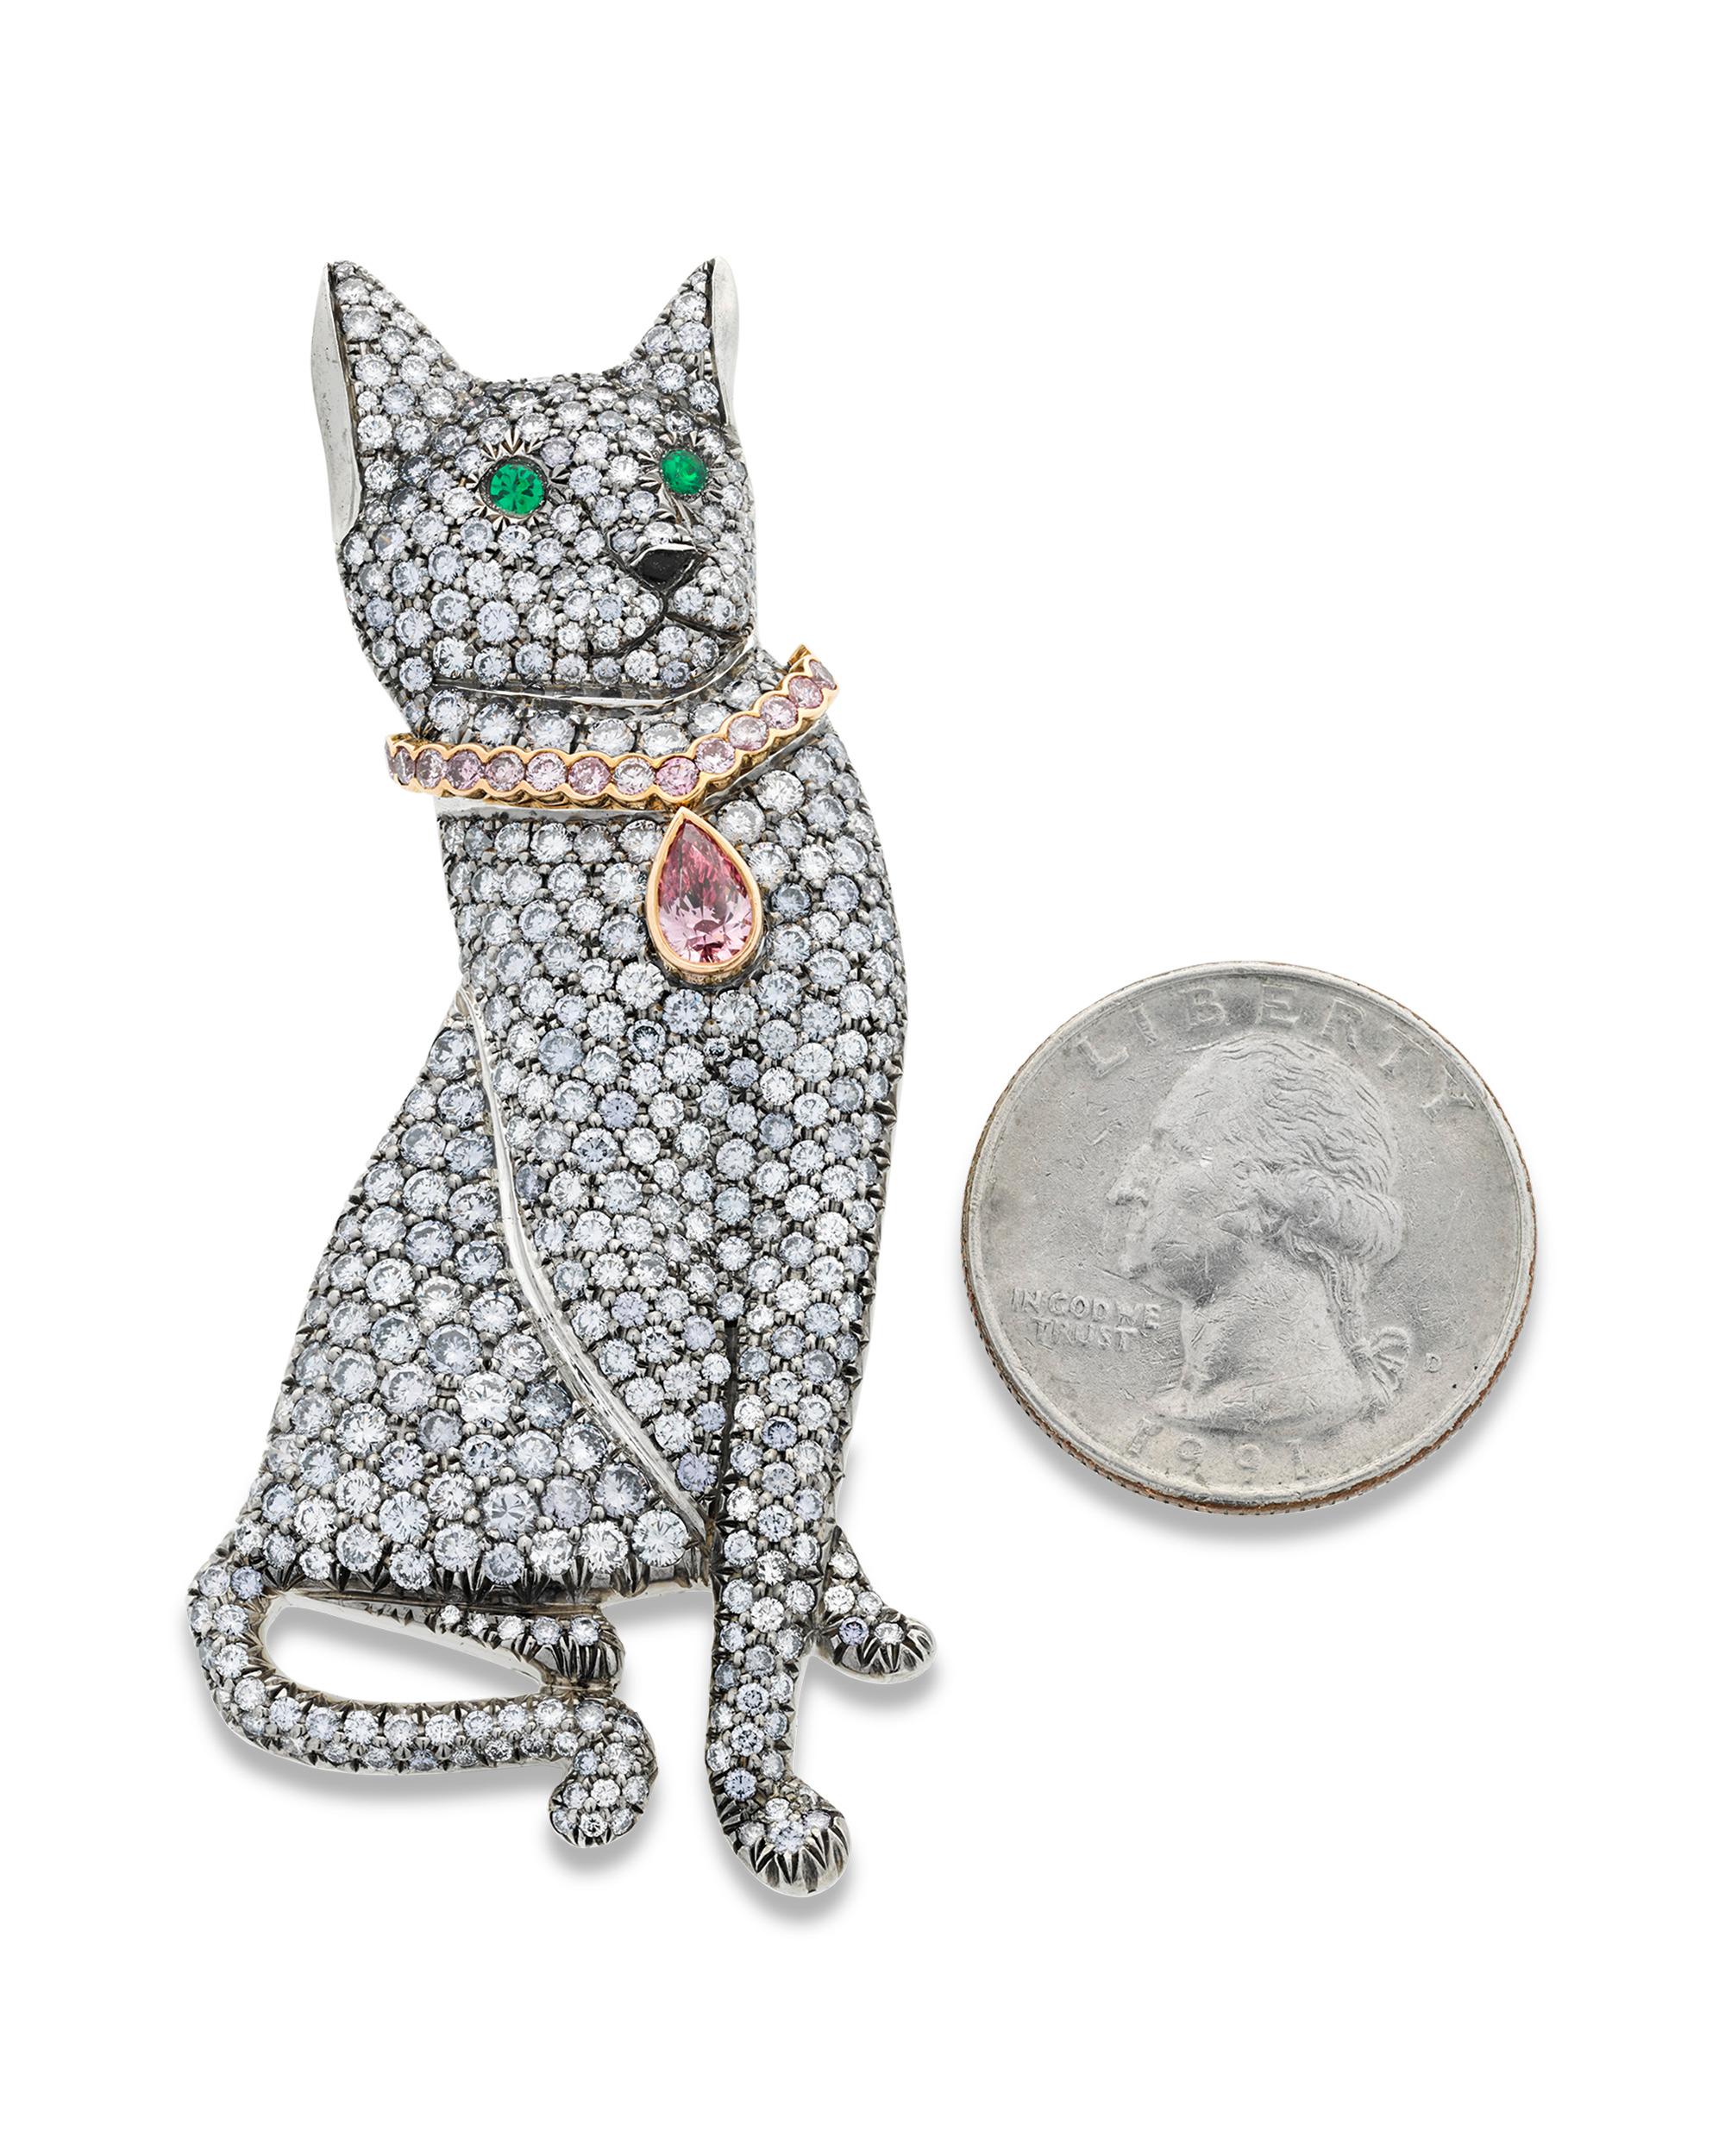 An array of colored diamonds bring this exquisite cat brooch to life. Inspired by the popular Russian Blue cat breed, the charming piece is set with a remarkable 7.51 total carats of rare light blue diamonds that perfectly mimic the cat's pale